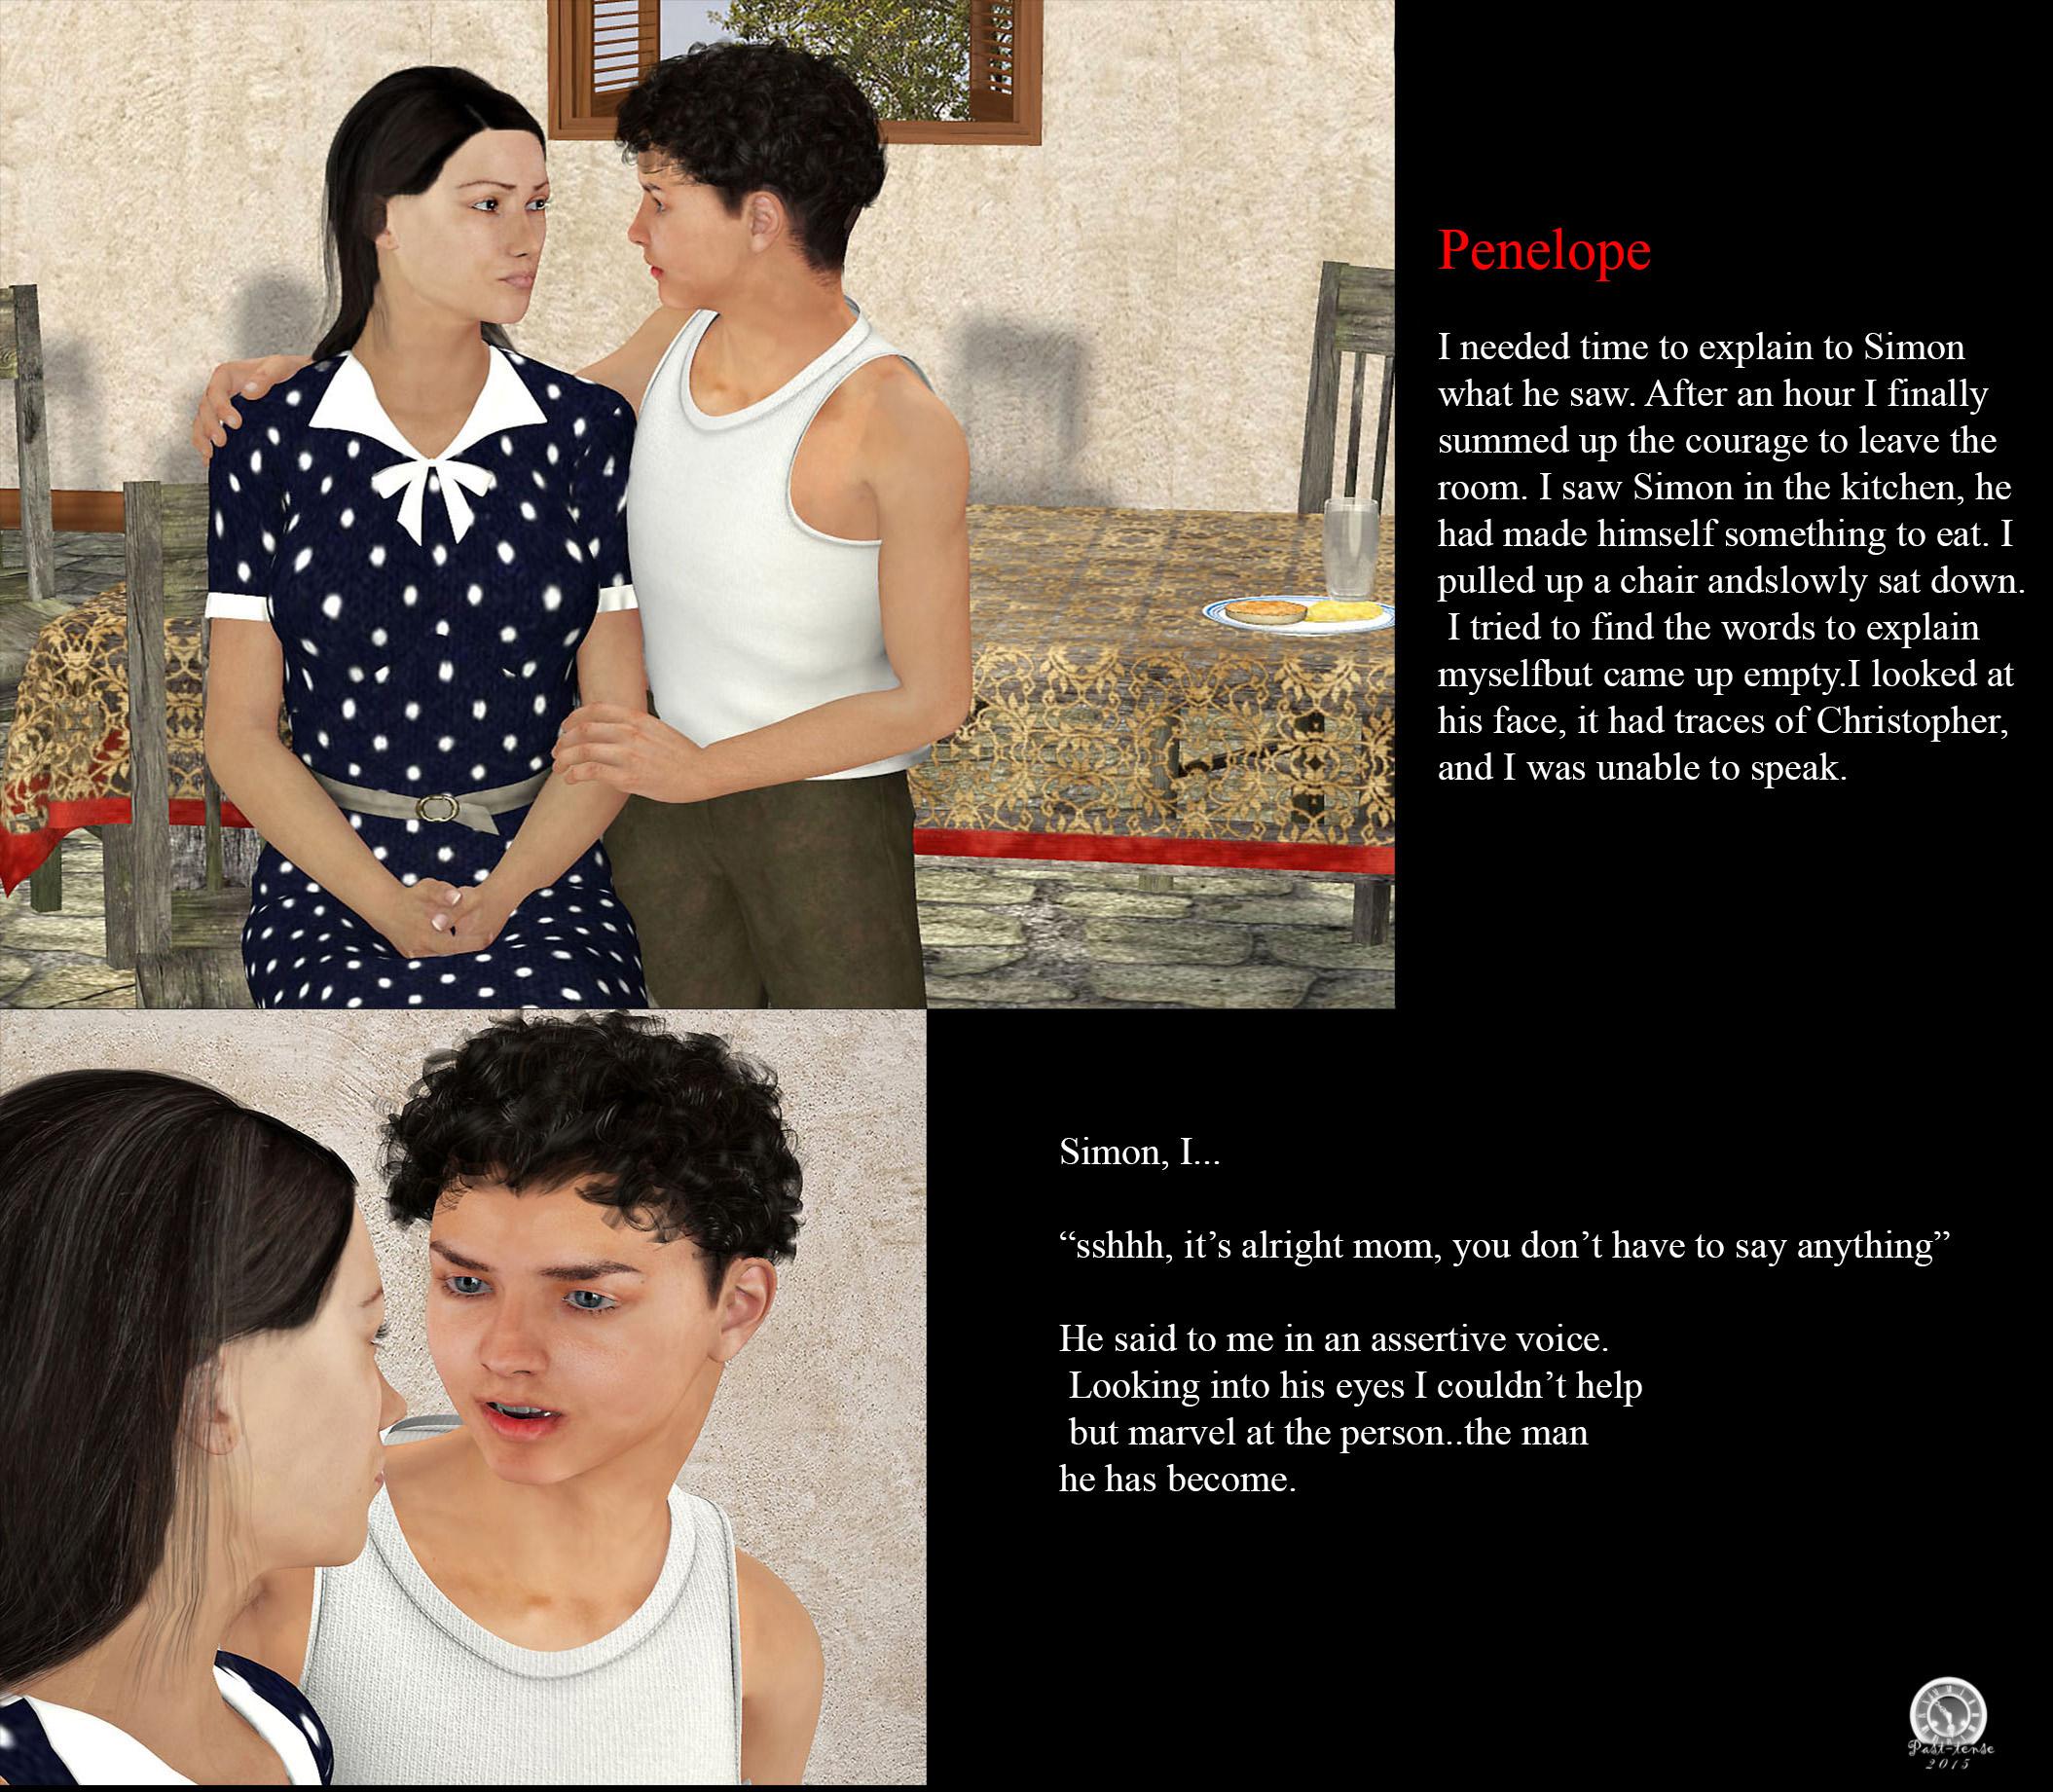 PAST TENSE - Conflict Between Simon and Penelope 1-5